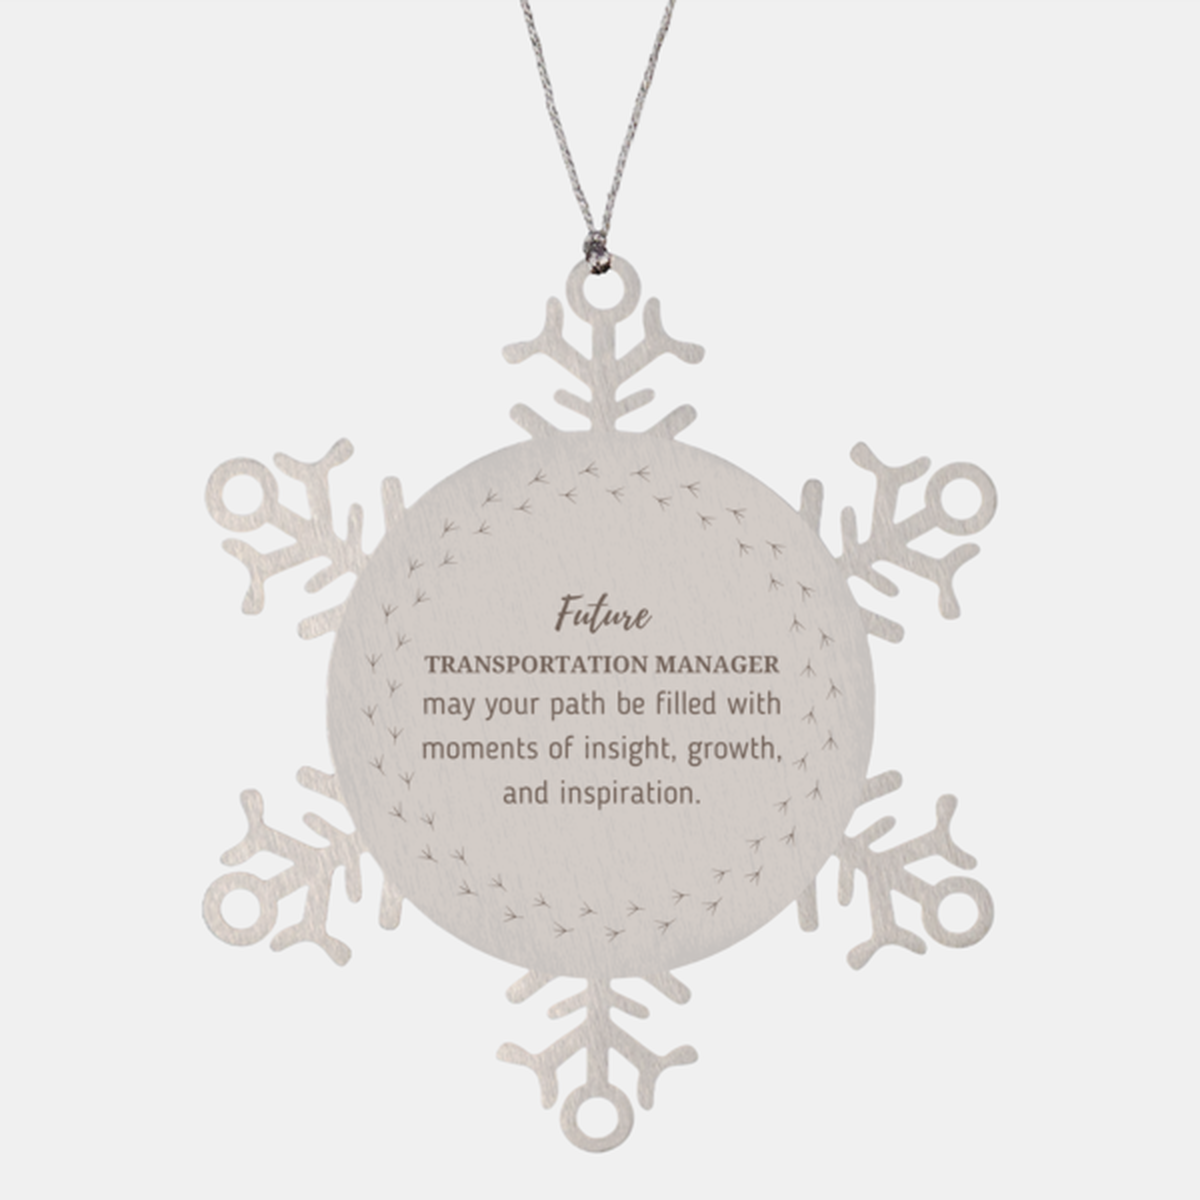 Future Transportation Manager Gifts, May your path be filled with moments of insight, Graduation Gifts for New Transportation Manager, Christmas Unique Snowflake Ornament For Men, Women, Friends